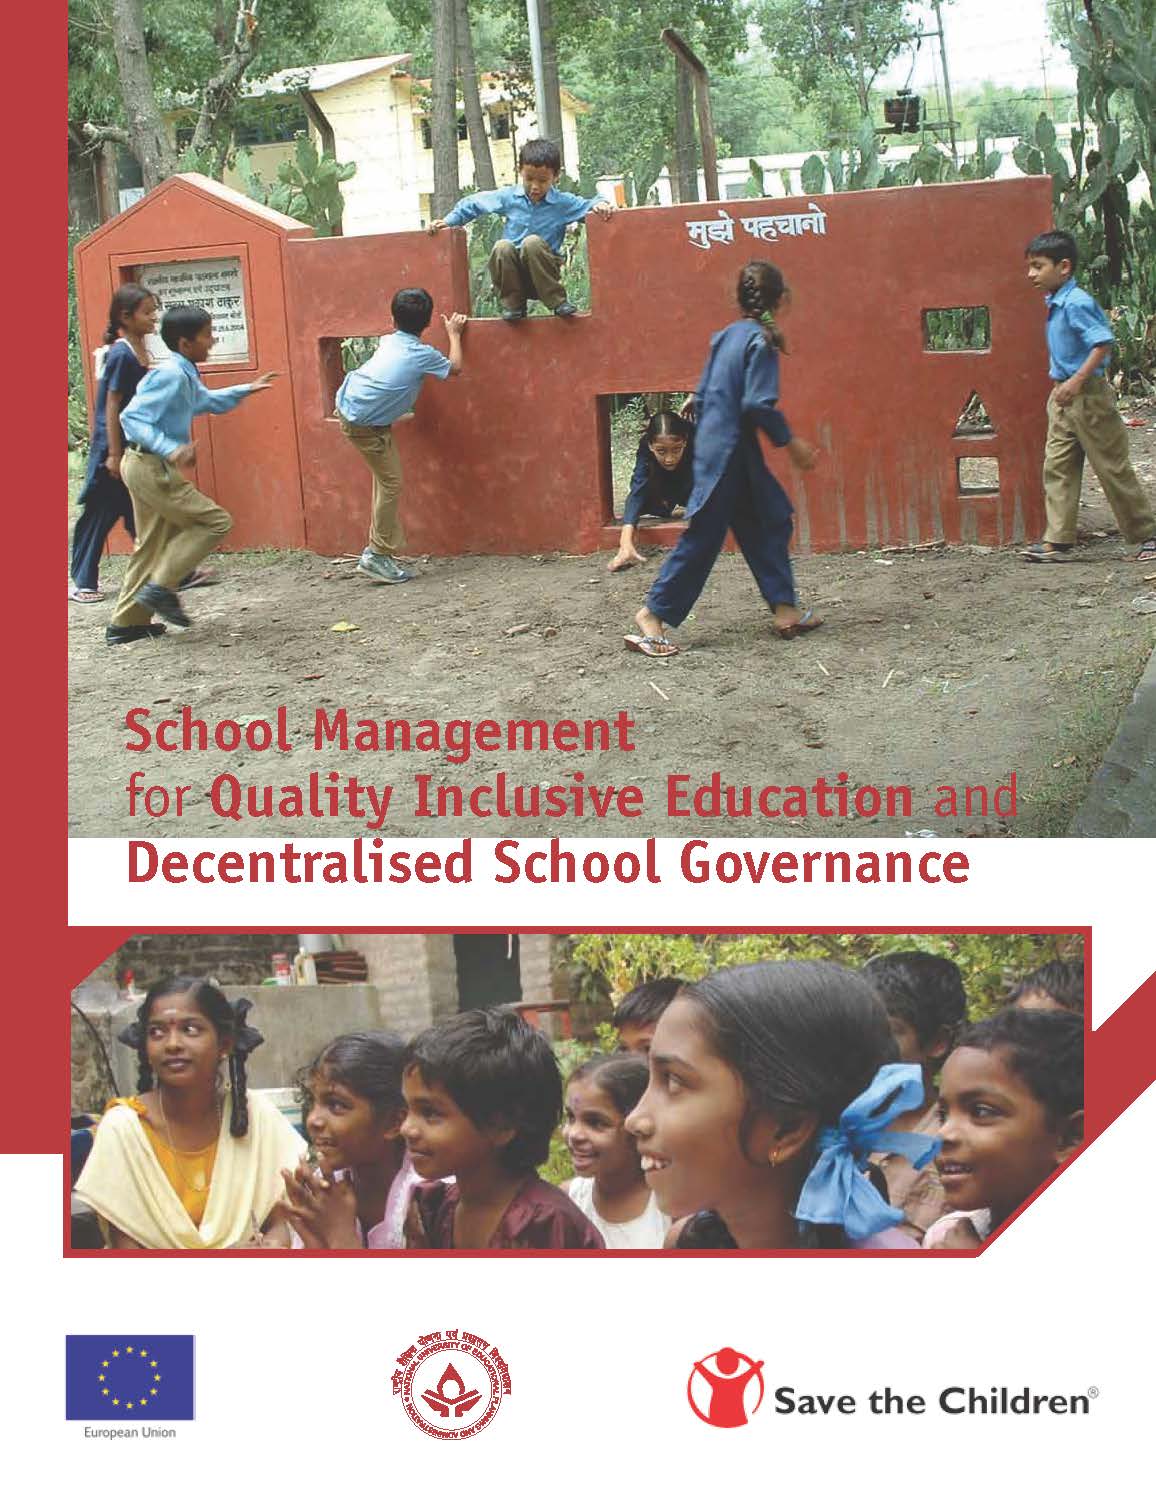 School Management for Quality Inclusive Education and Decentralised School Governance